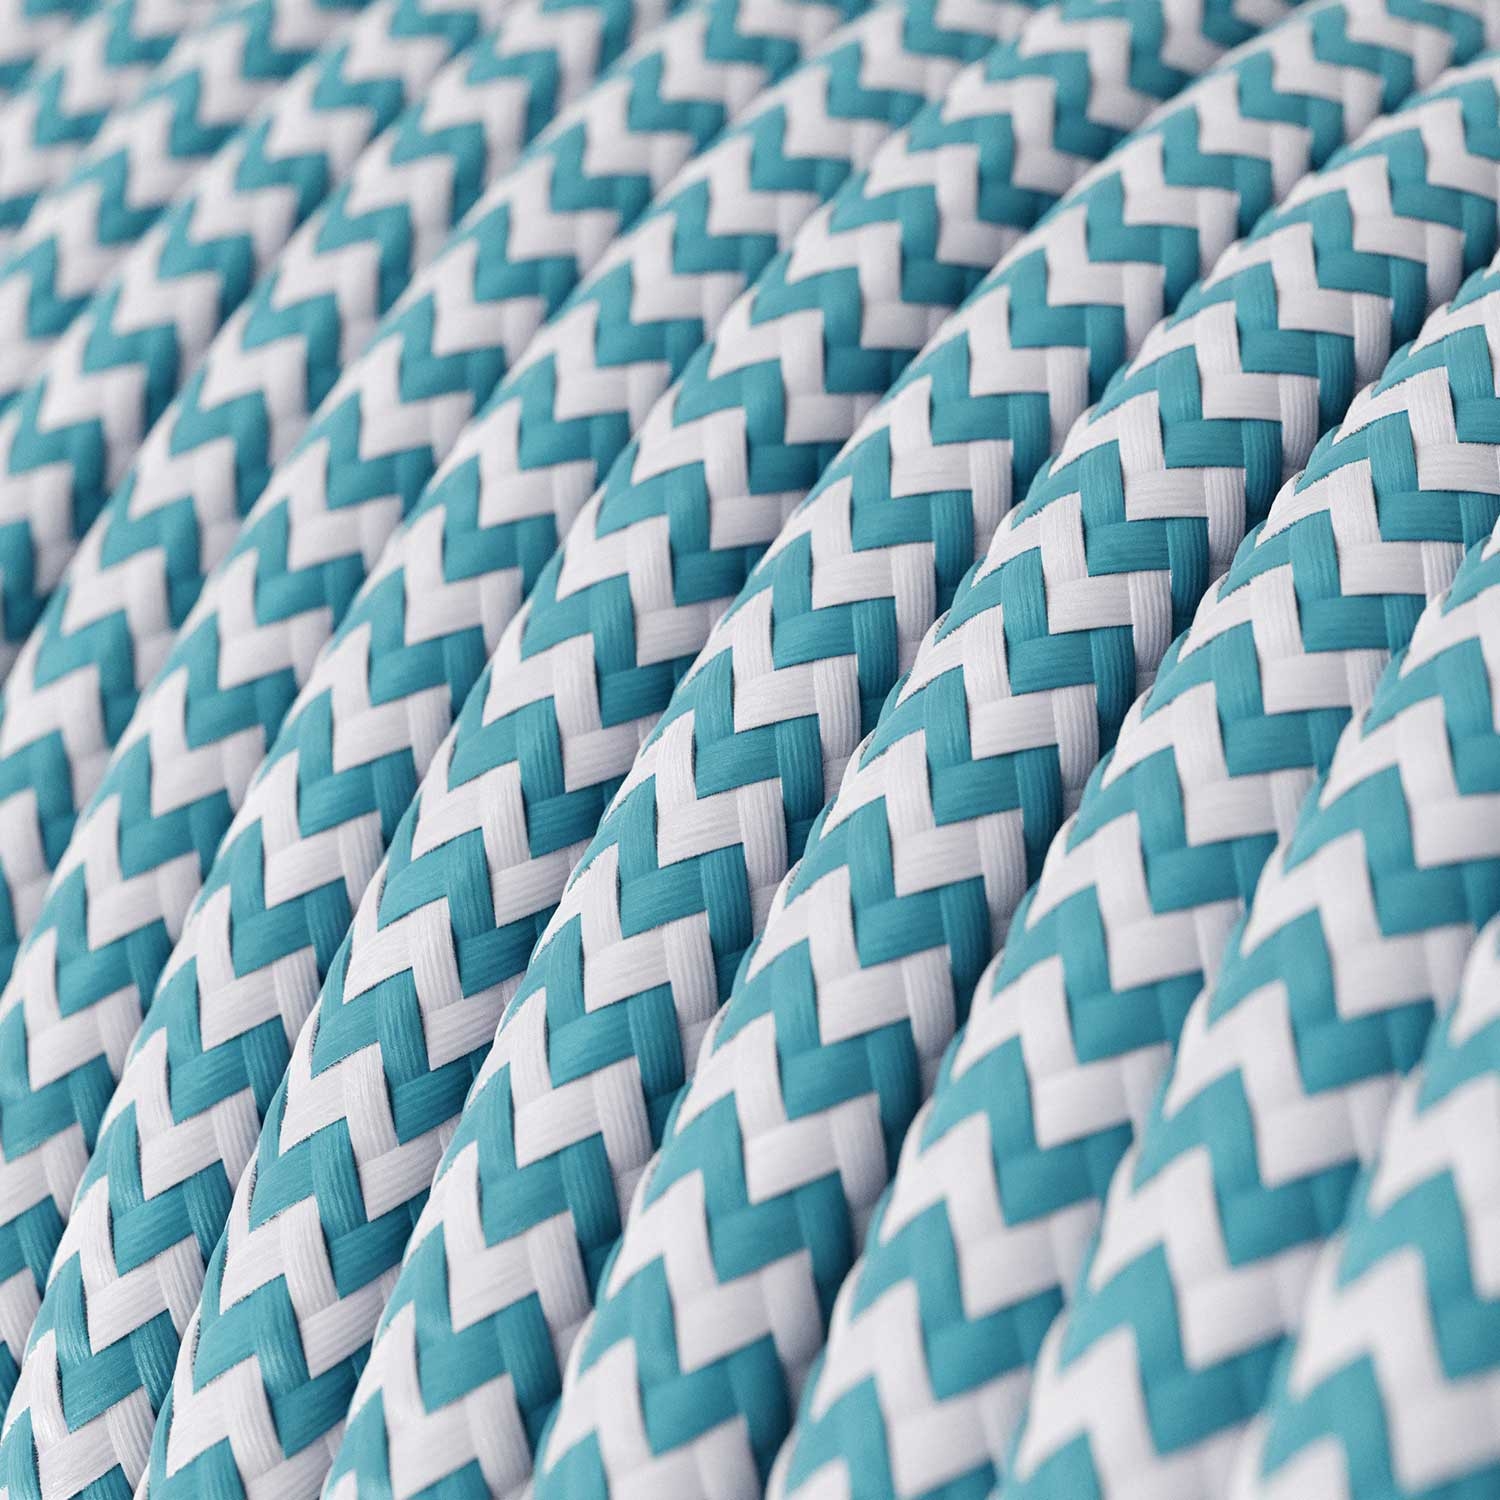 RZ11 Cyan ZigZag Round Rayon Electrical Fabric Cloth Cord Cable